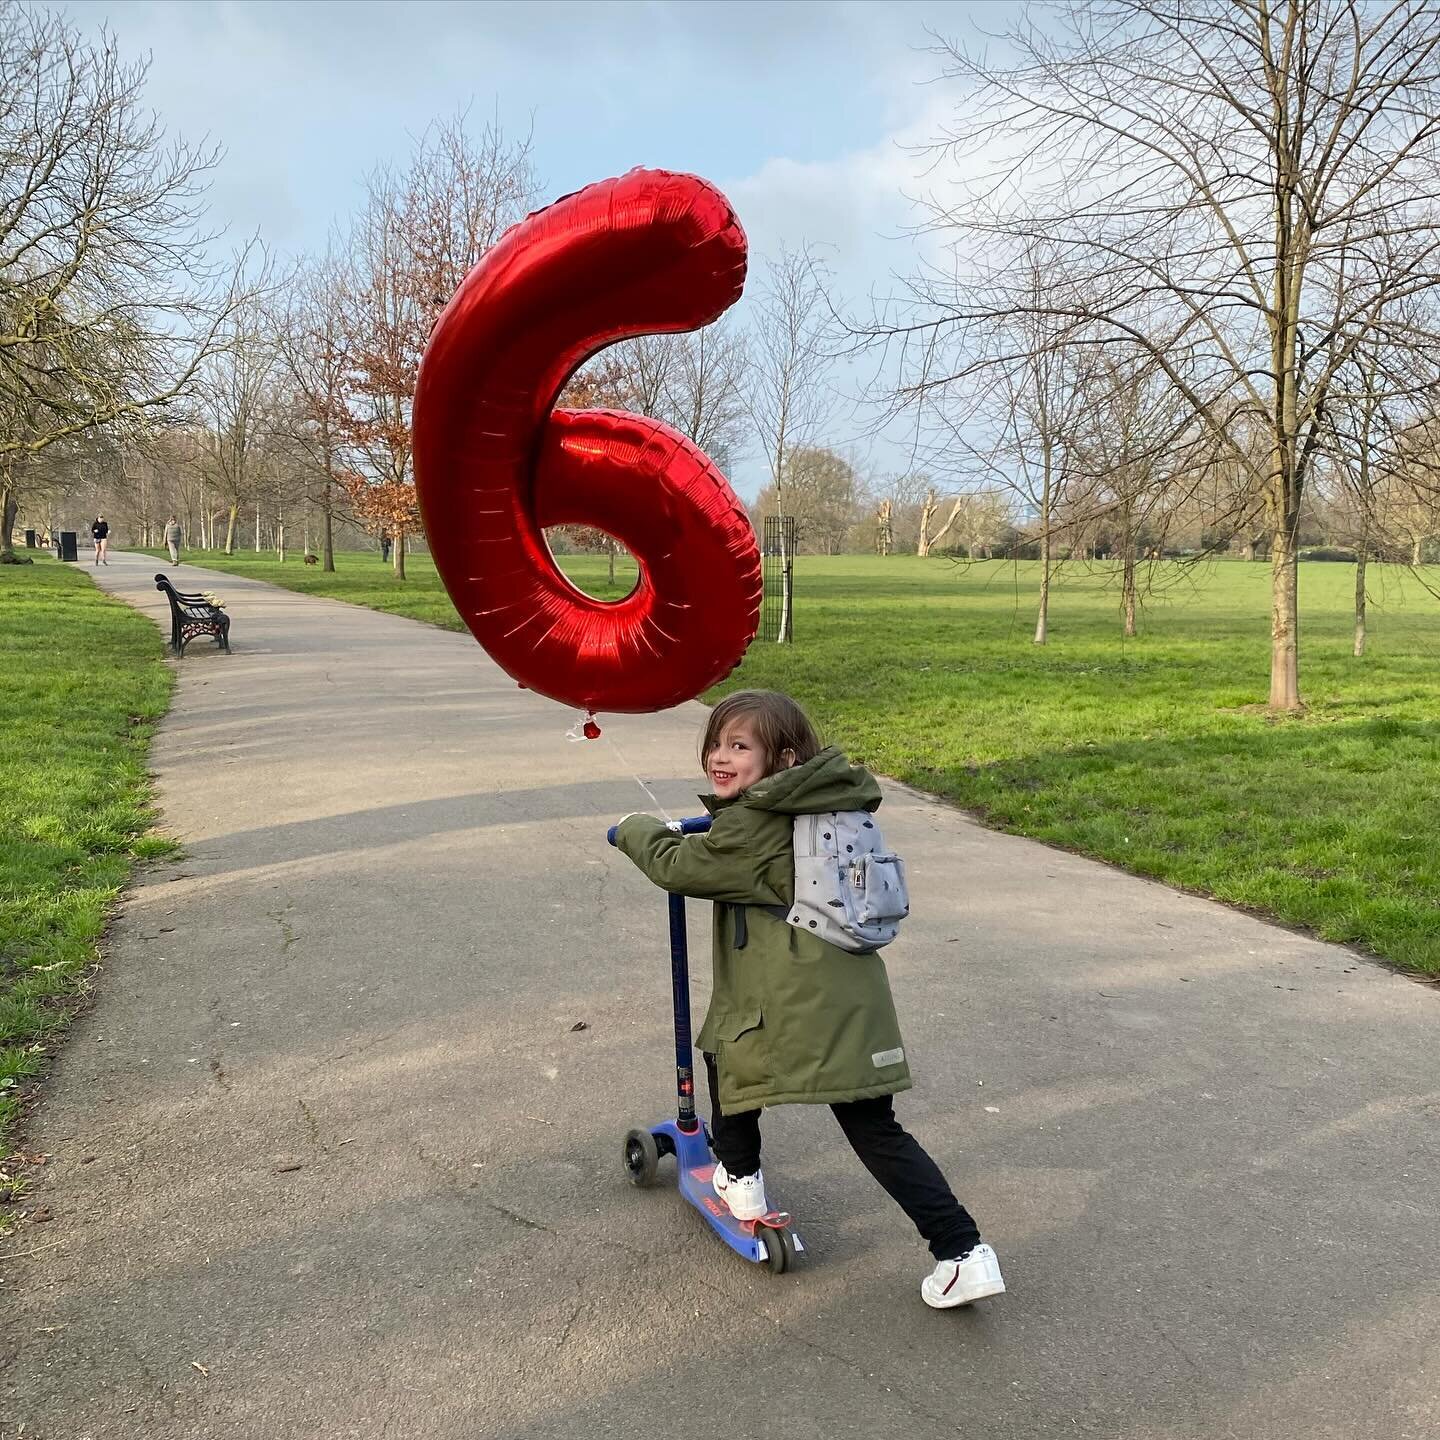 Stan is 6! Happy Birthday my darling Constantin. What an absolute joy you and your birthday have been. You know yourself so well. You are incredibly wise (not just beyond your years, you have a deep inner knowing and wisdom many adults will never hav